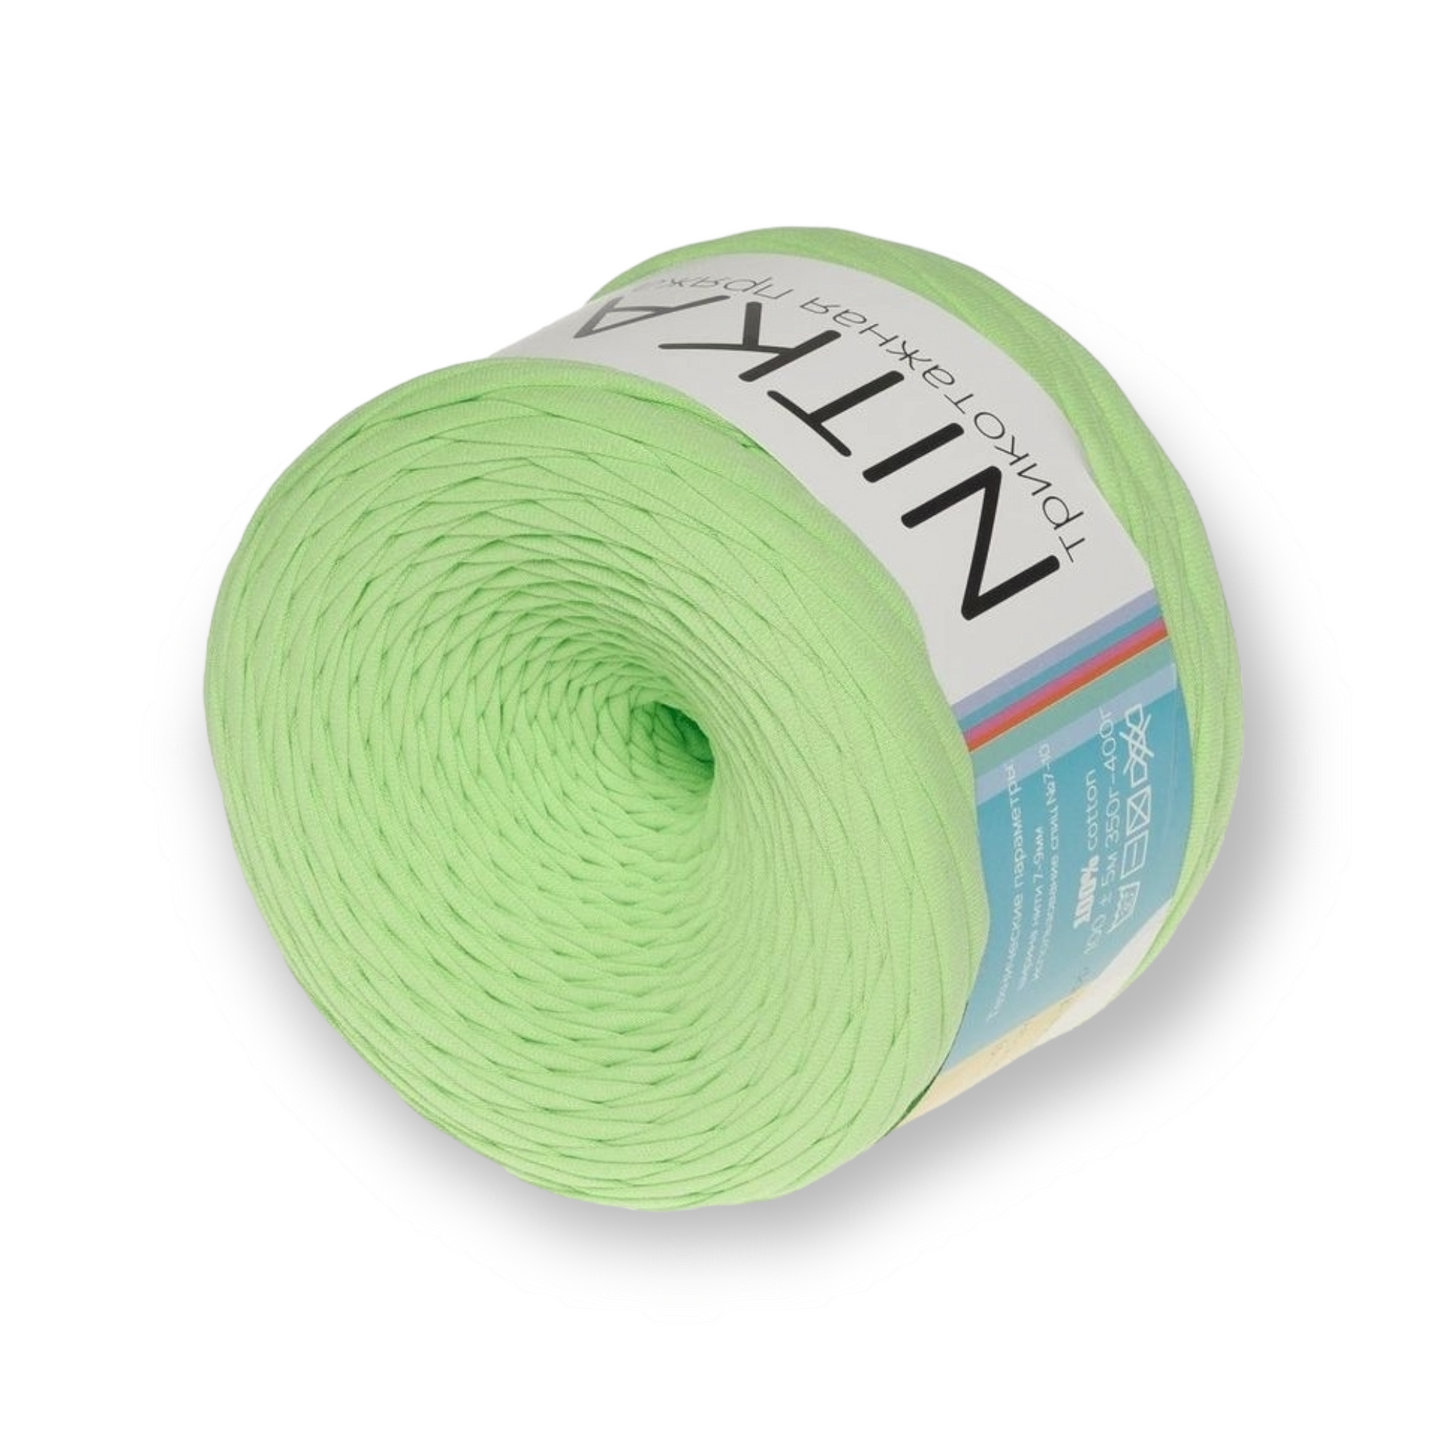 Color gradient yarn NITKA textile yarn from Russia 100% cotton 1A quality 100 meters roll always constant width jersey ribbon jersey yarn